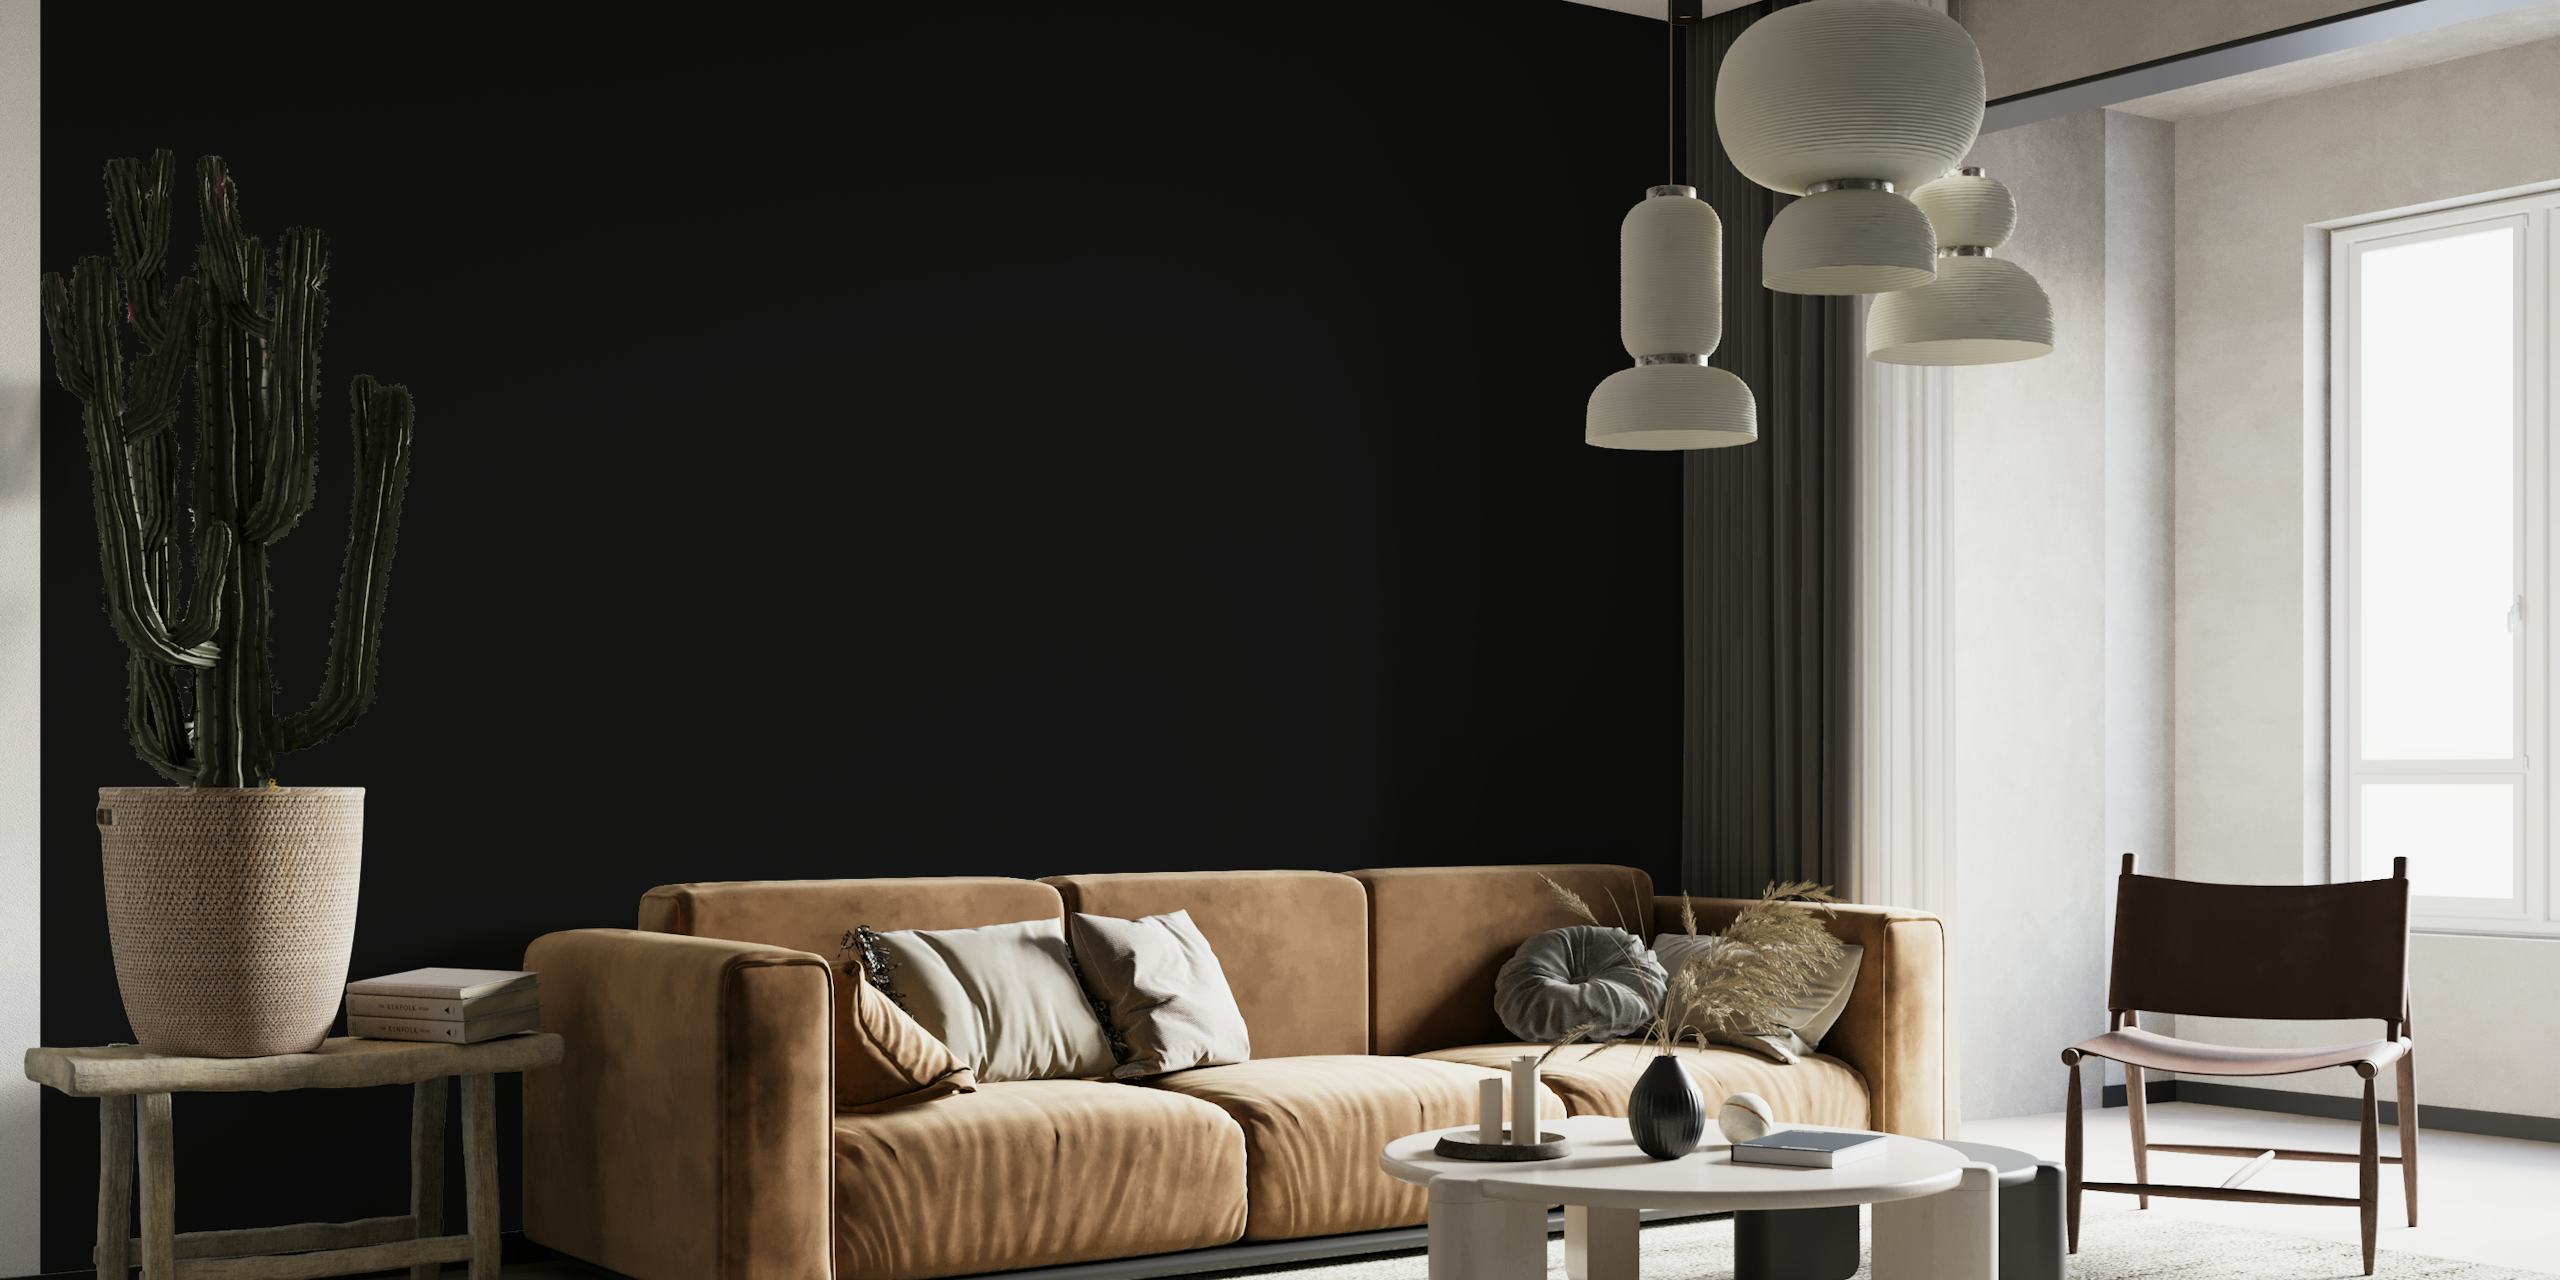 Elegant Perfect Black wall mural with deep black tones for a sophisticated interior.